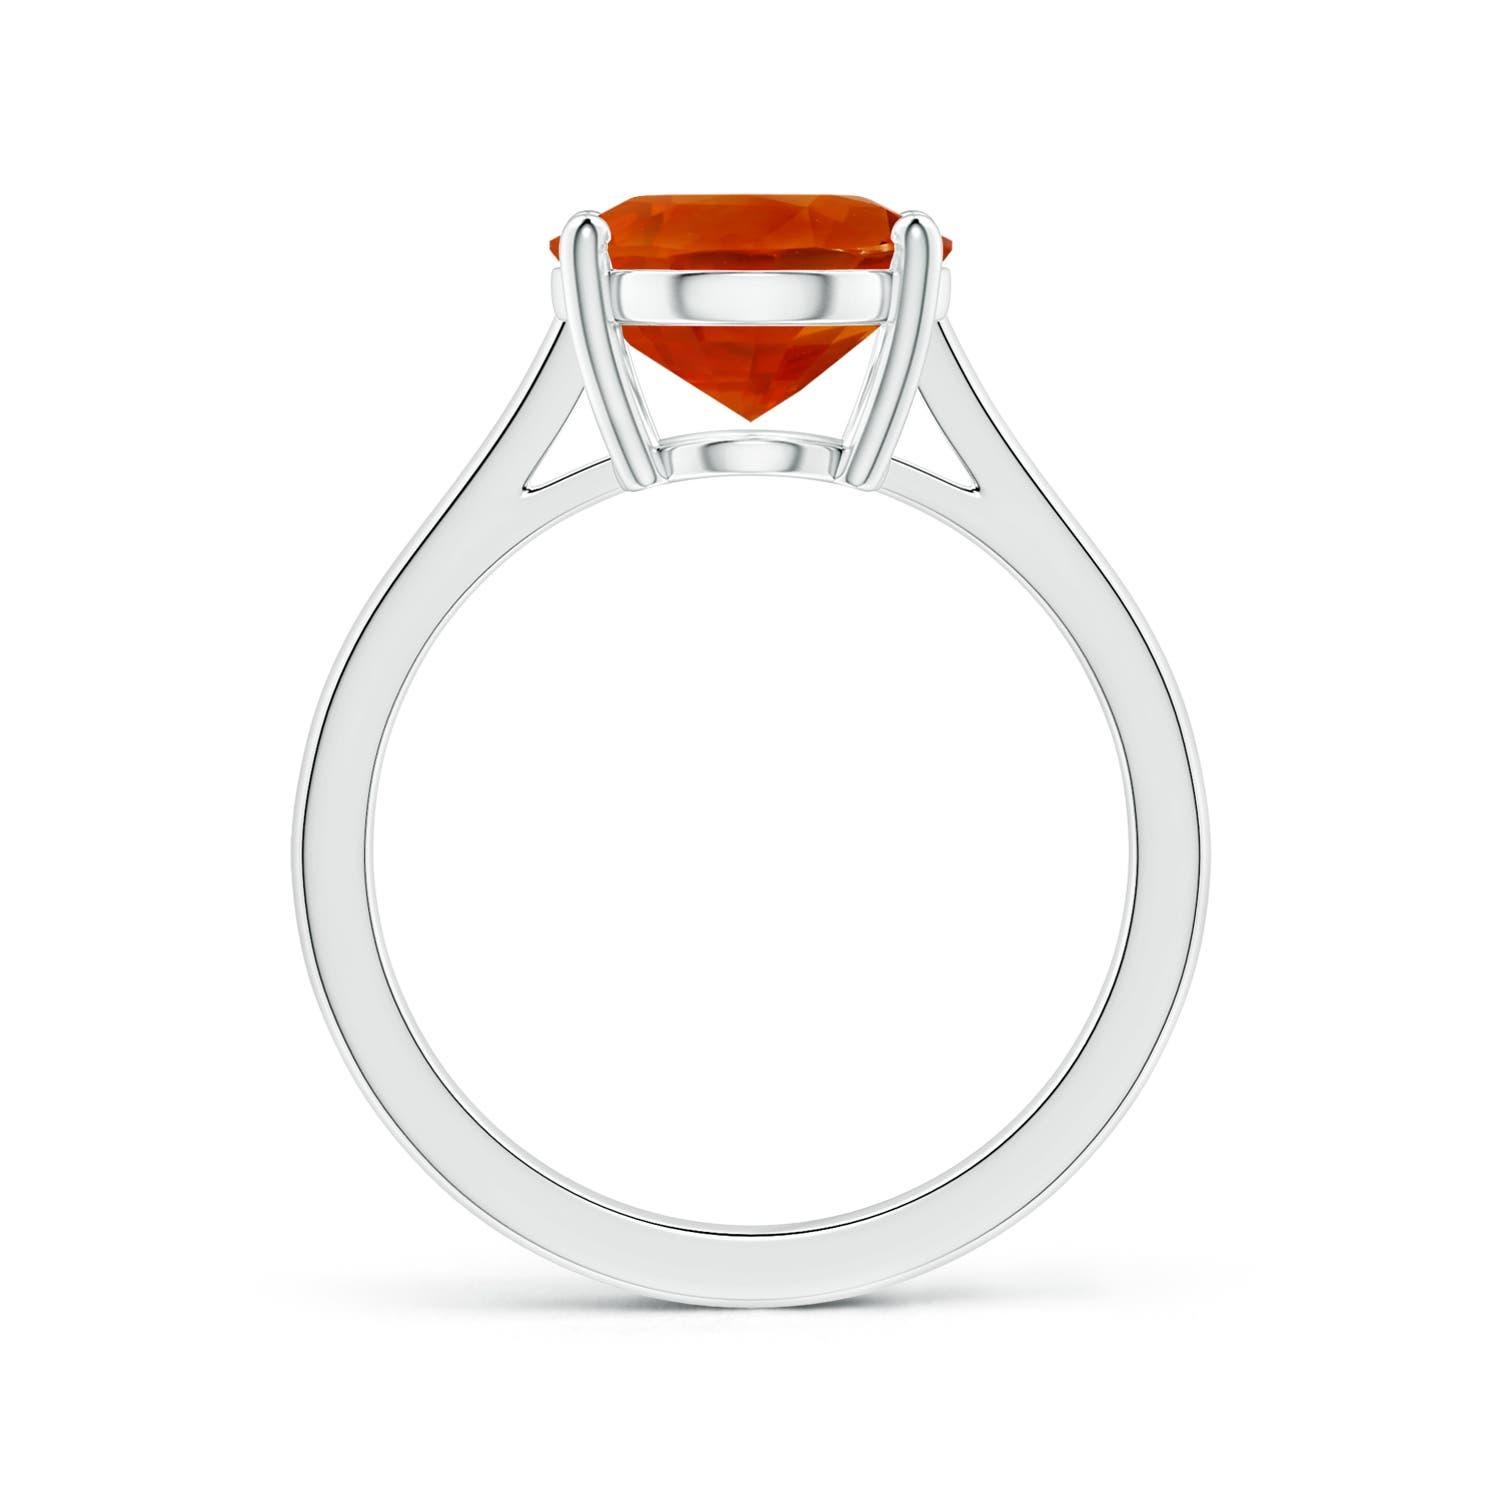 For Sale:  Angara Gia Certified Natural Orange Sapphire Solitaire Ring in White Gold 2